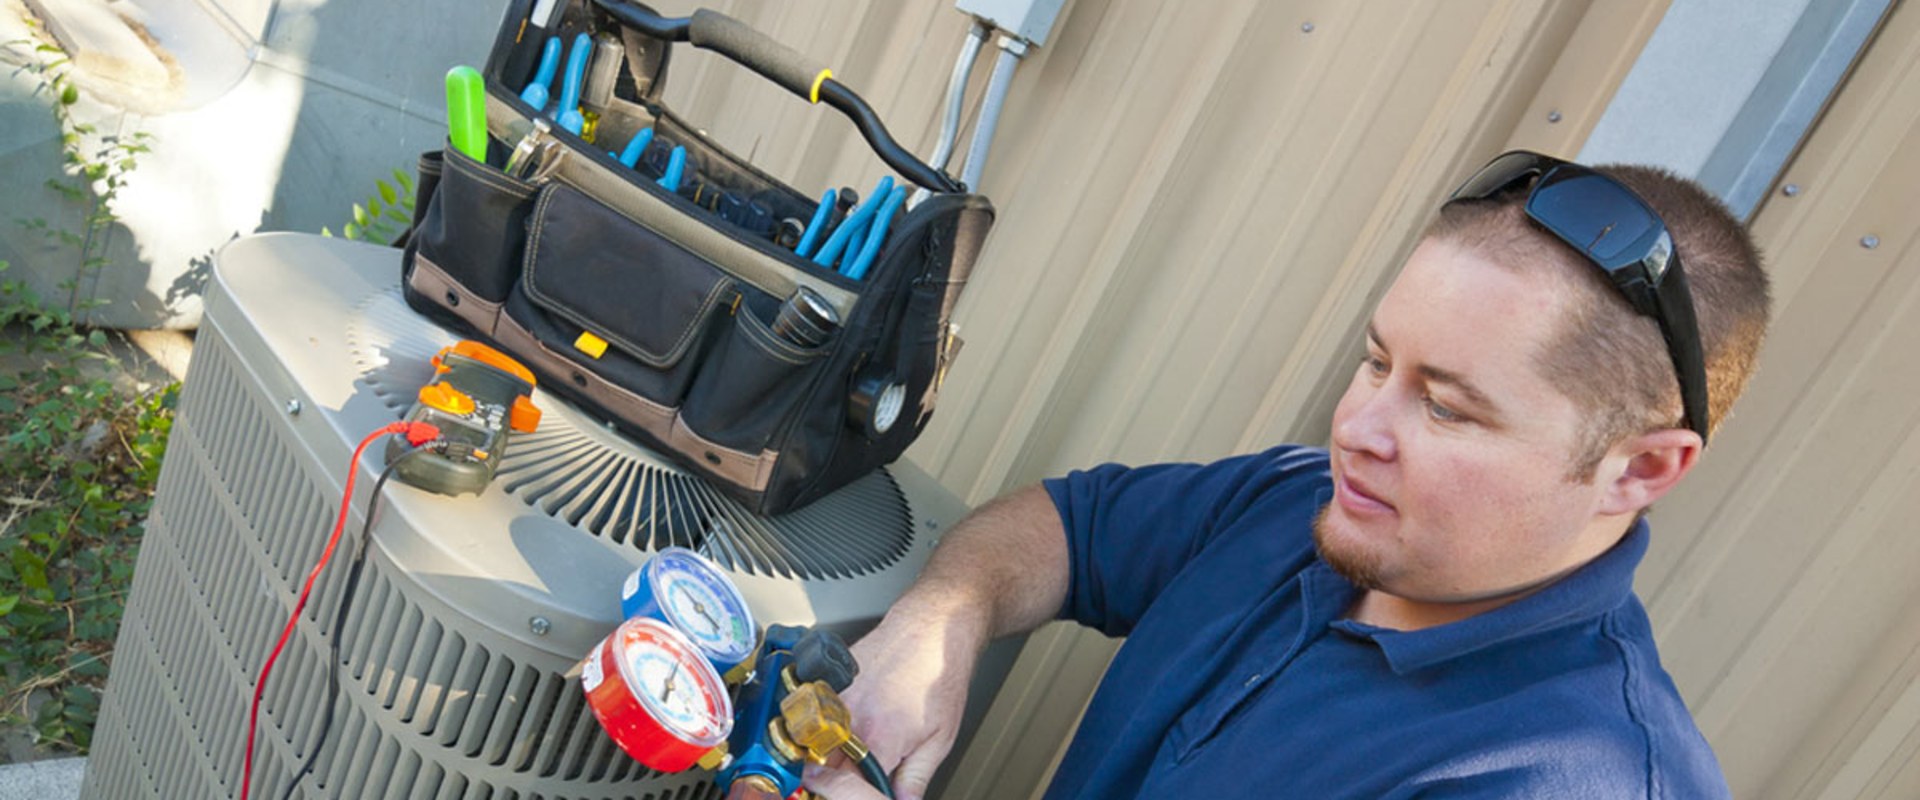 Signs You Need an Air Conditioner Tune-Up: How to Know When It's Time